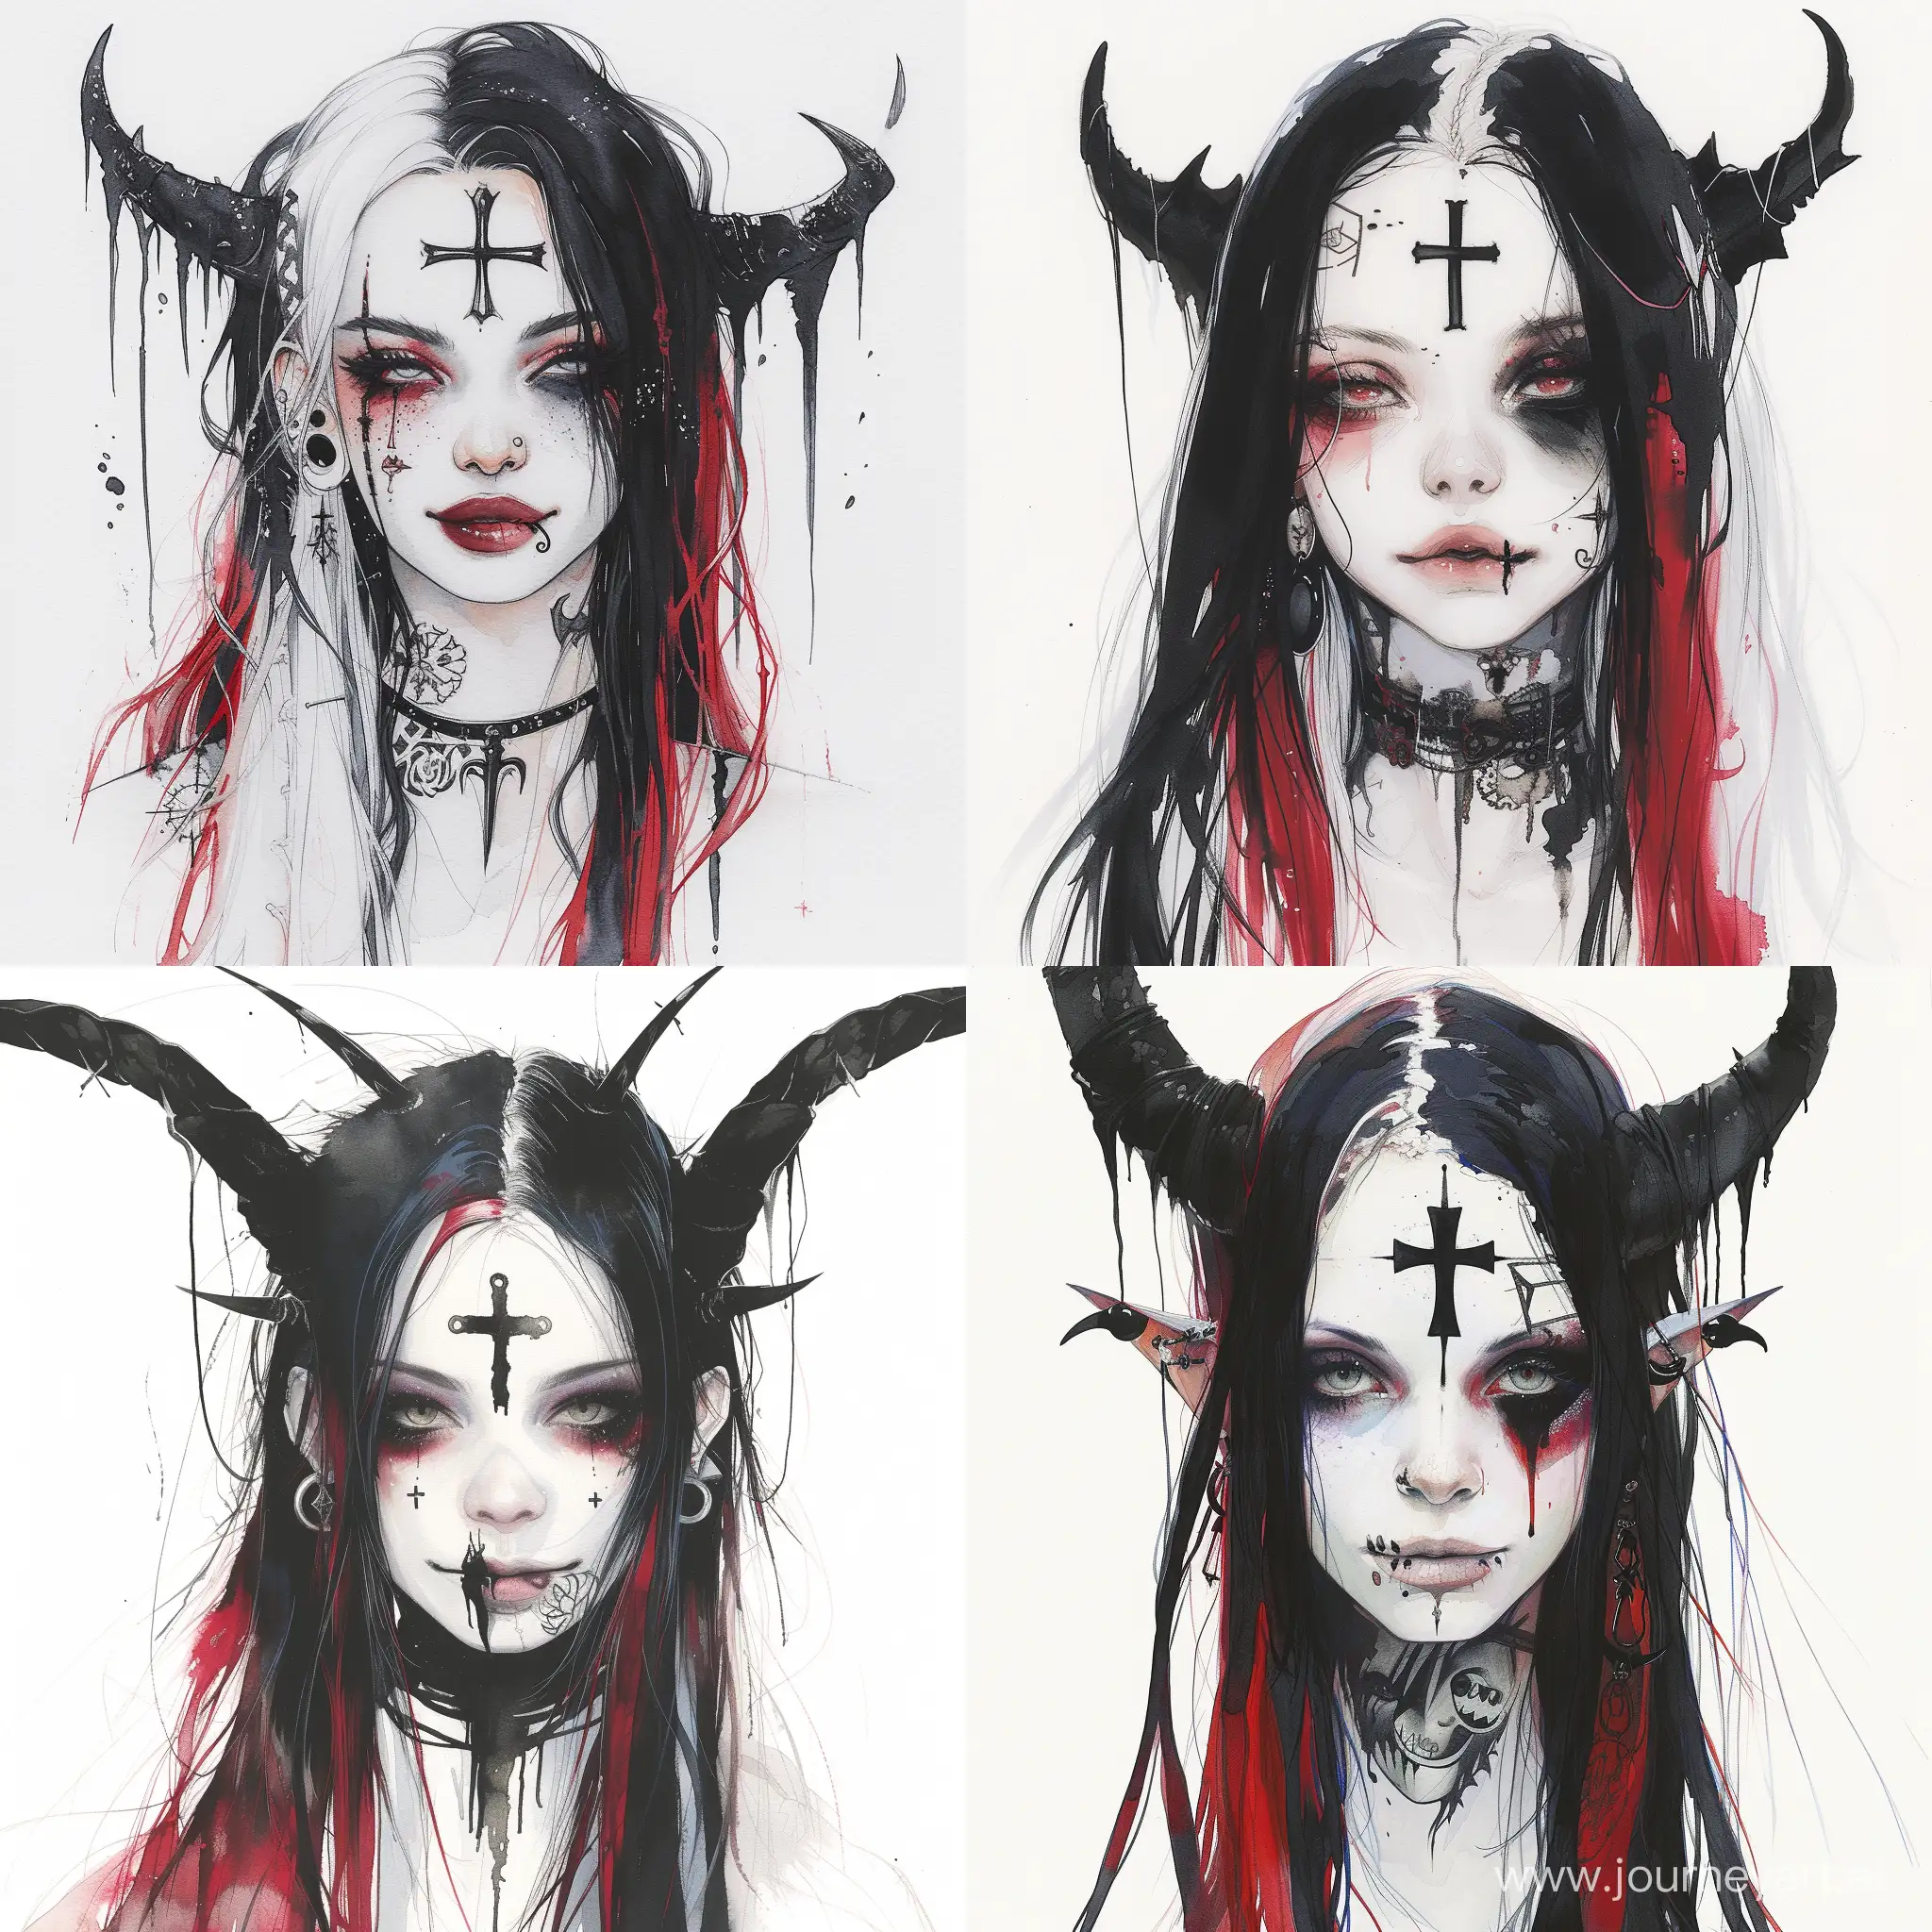 A face portrait of an anime woman with white pale skin, eyeshadow, very long black and red hair, a face tattoo of a cross, ear piercings and black demon horns, anime, watercolor